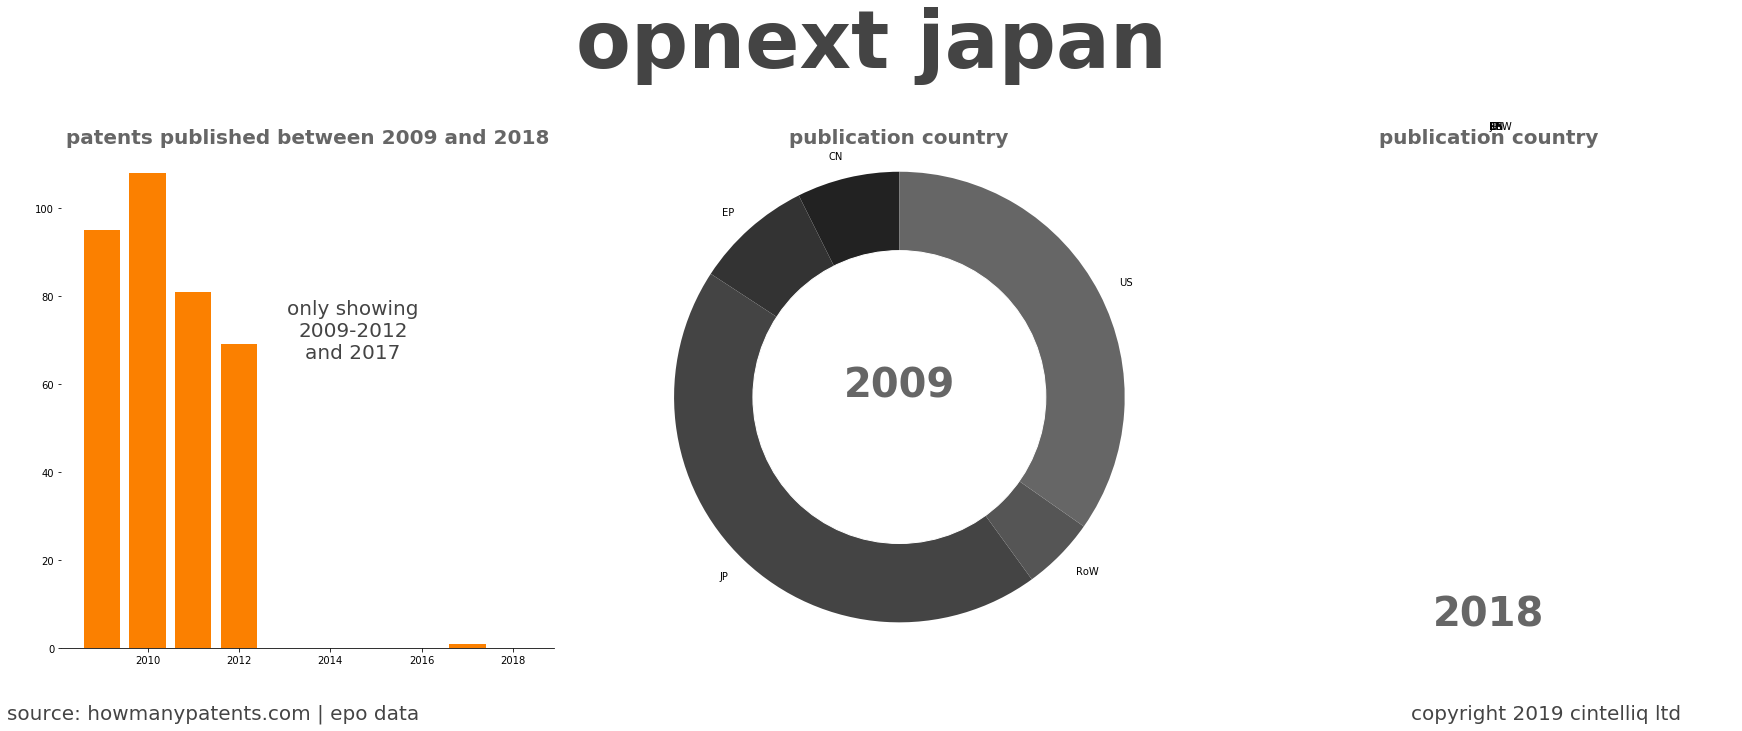 summary of patents for Opnext Japan